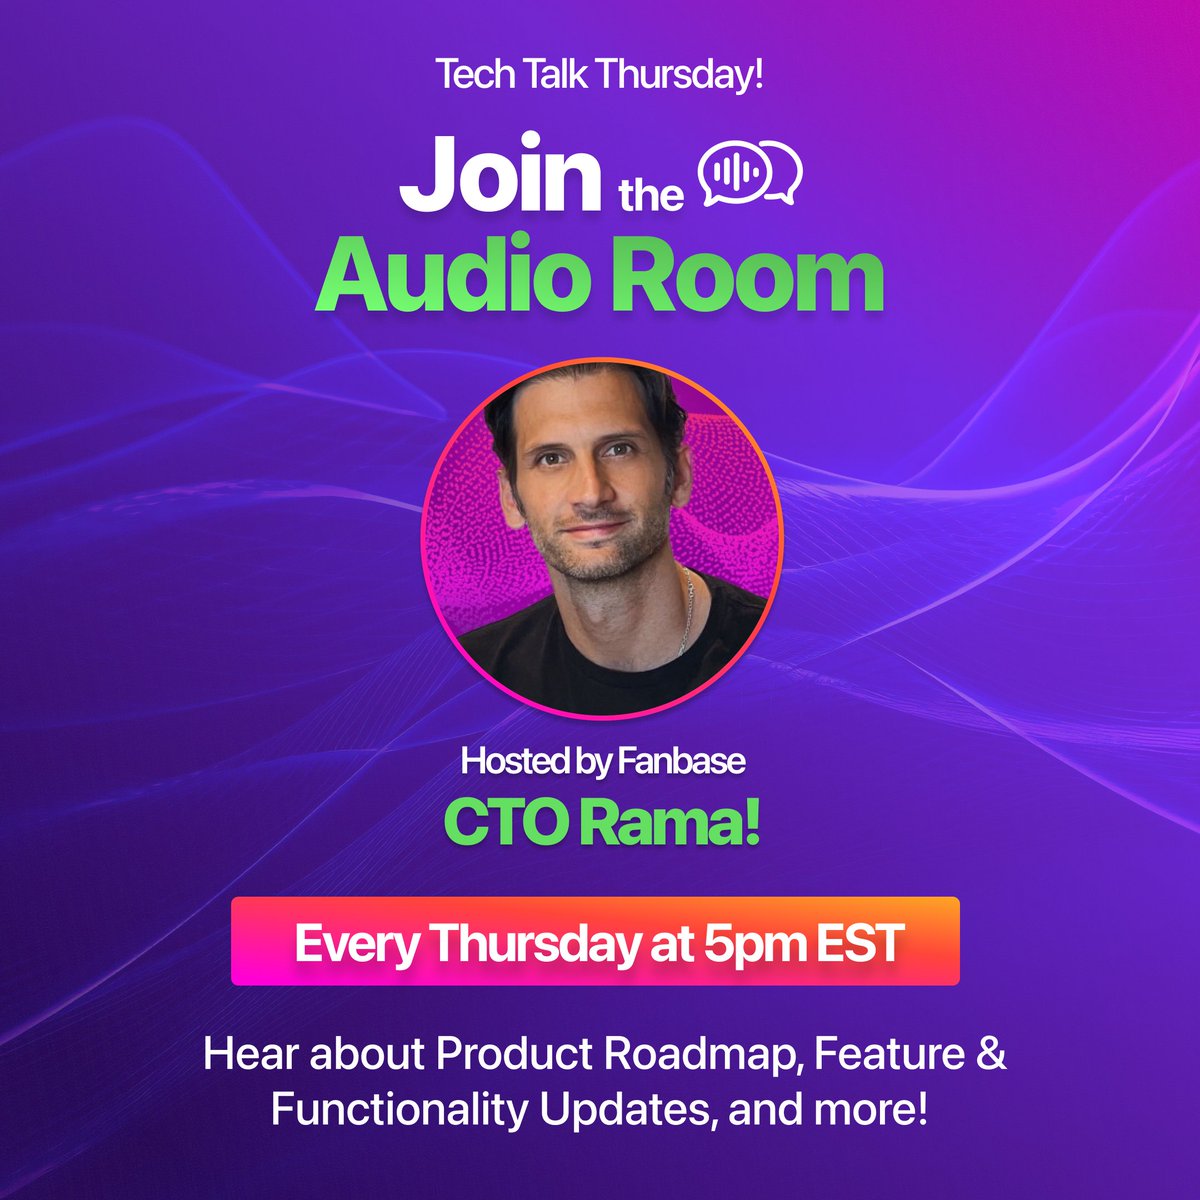 A one on one chat with CTO @RamaCanovas?! What more could you ask for? Join Ramiro's exclusive audio room TODAY at 5pm EST! Tune in to hear about all updates regarding Fanbase and what's to come! Tap in: fanbase.app/audio/tech-talk #tech #fanbase #techtalk #app #appdevelopment